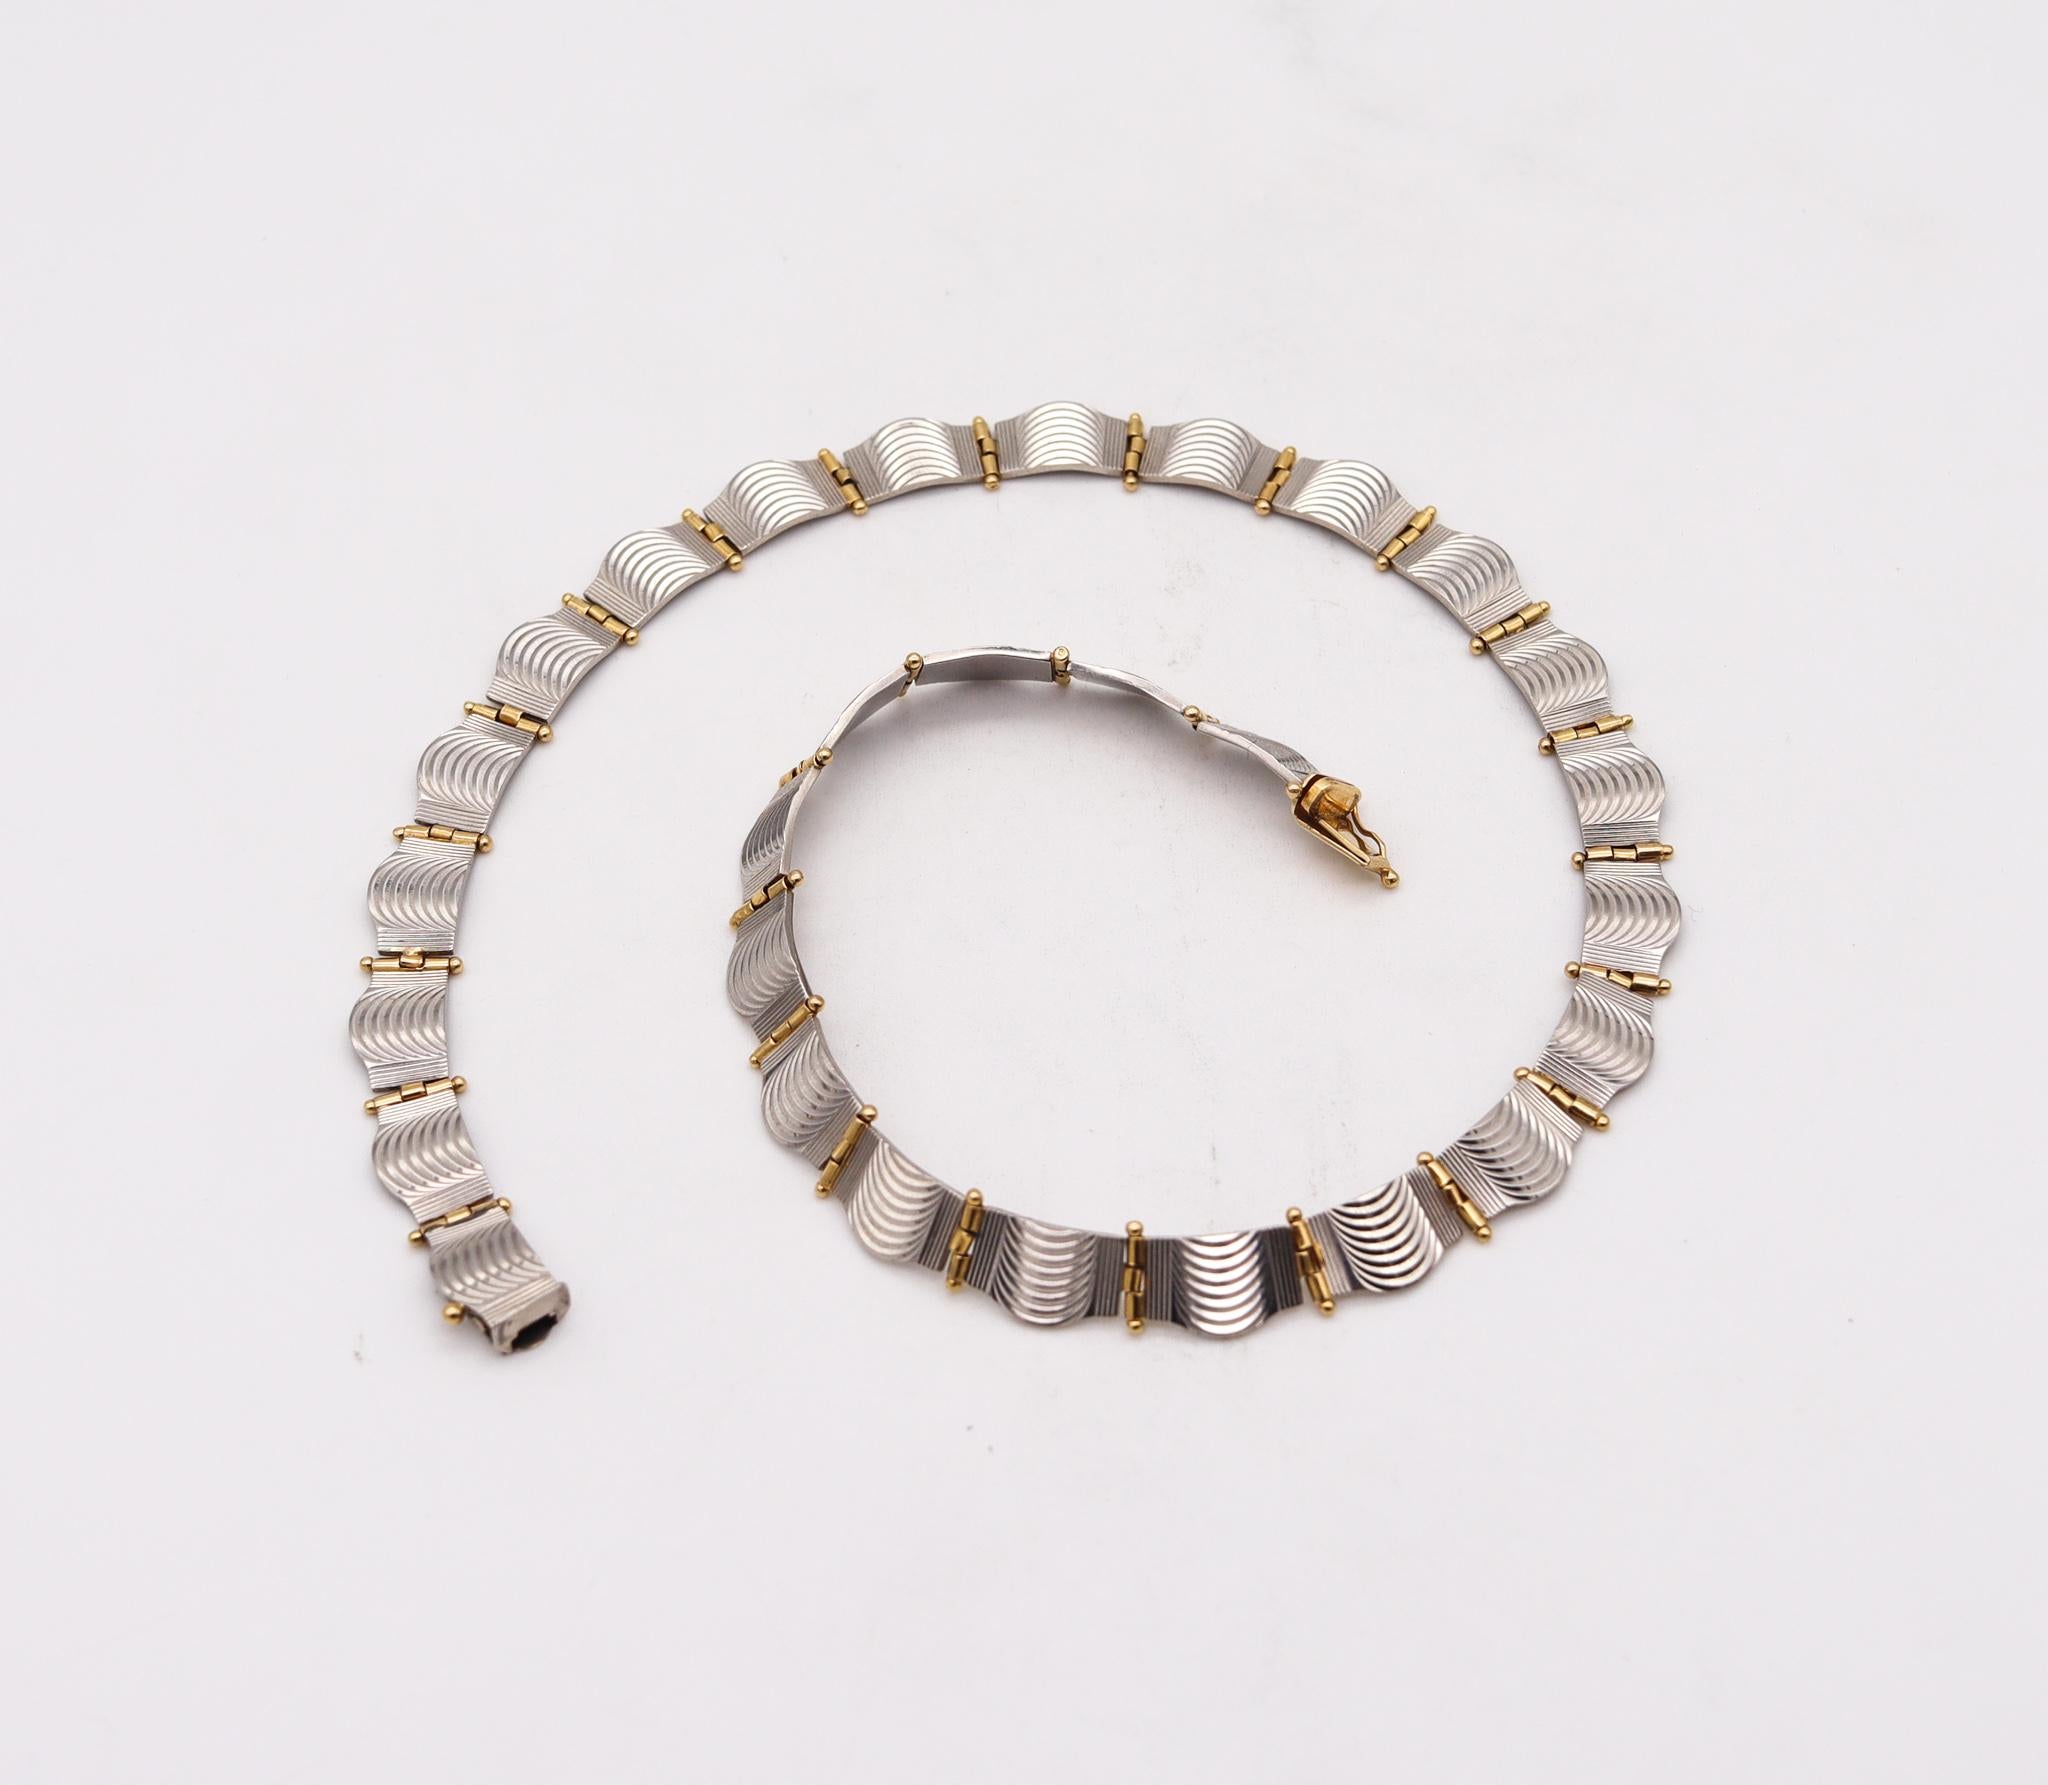 German 1935 Art Deco Undulated Patterns Collar Necklace Platinum and 18Kt Gold For Sale 1